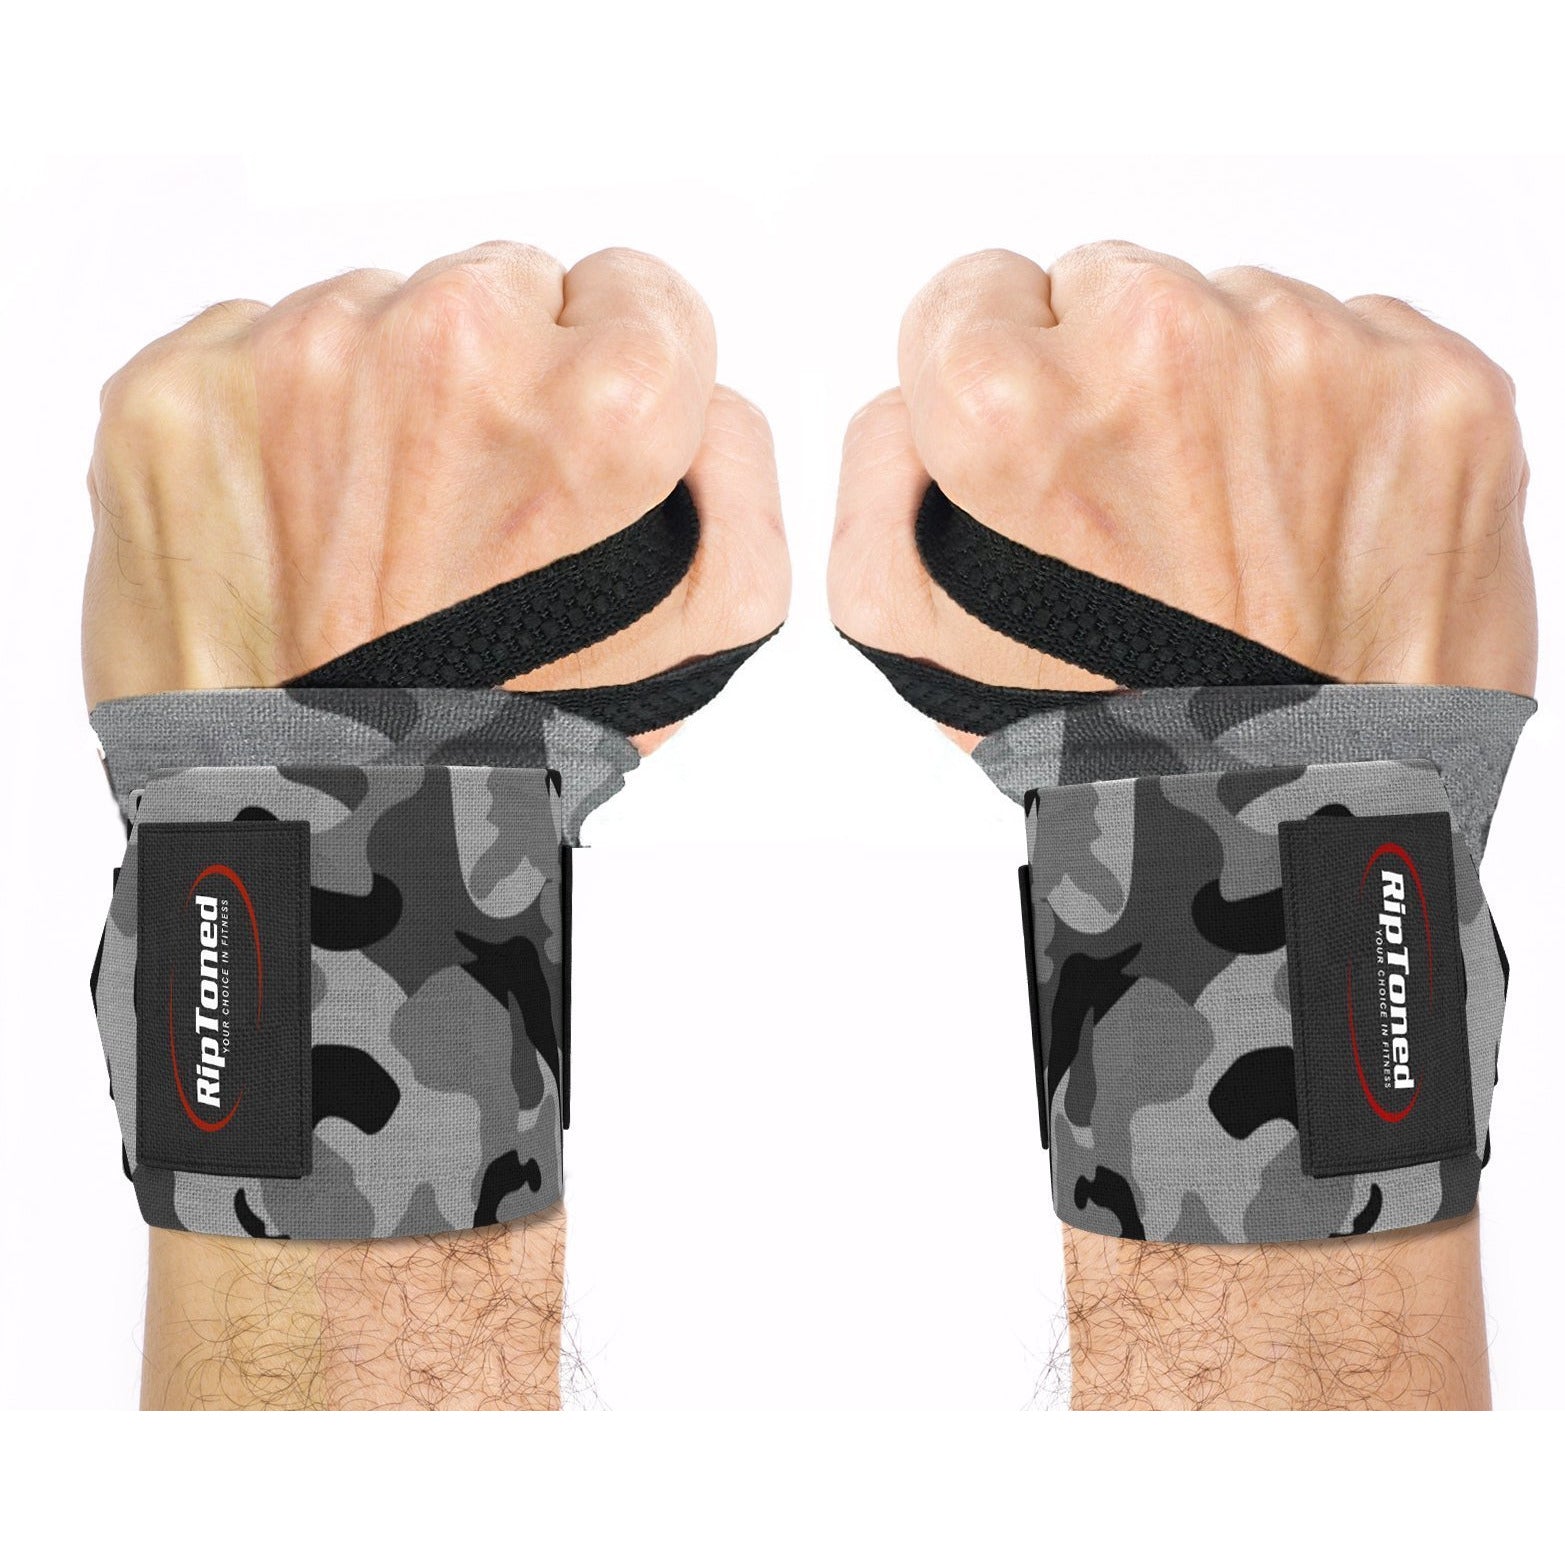 Rip Toned Wrist Wraps 18" Professional Grade with Thumb Loops - Wrist Support for Men & Women - Weight Lifting, Crossfit, Powerlifting, Strength Training - Bonus Ebook - (Gray Camo Stiff)